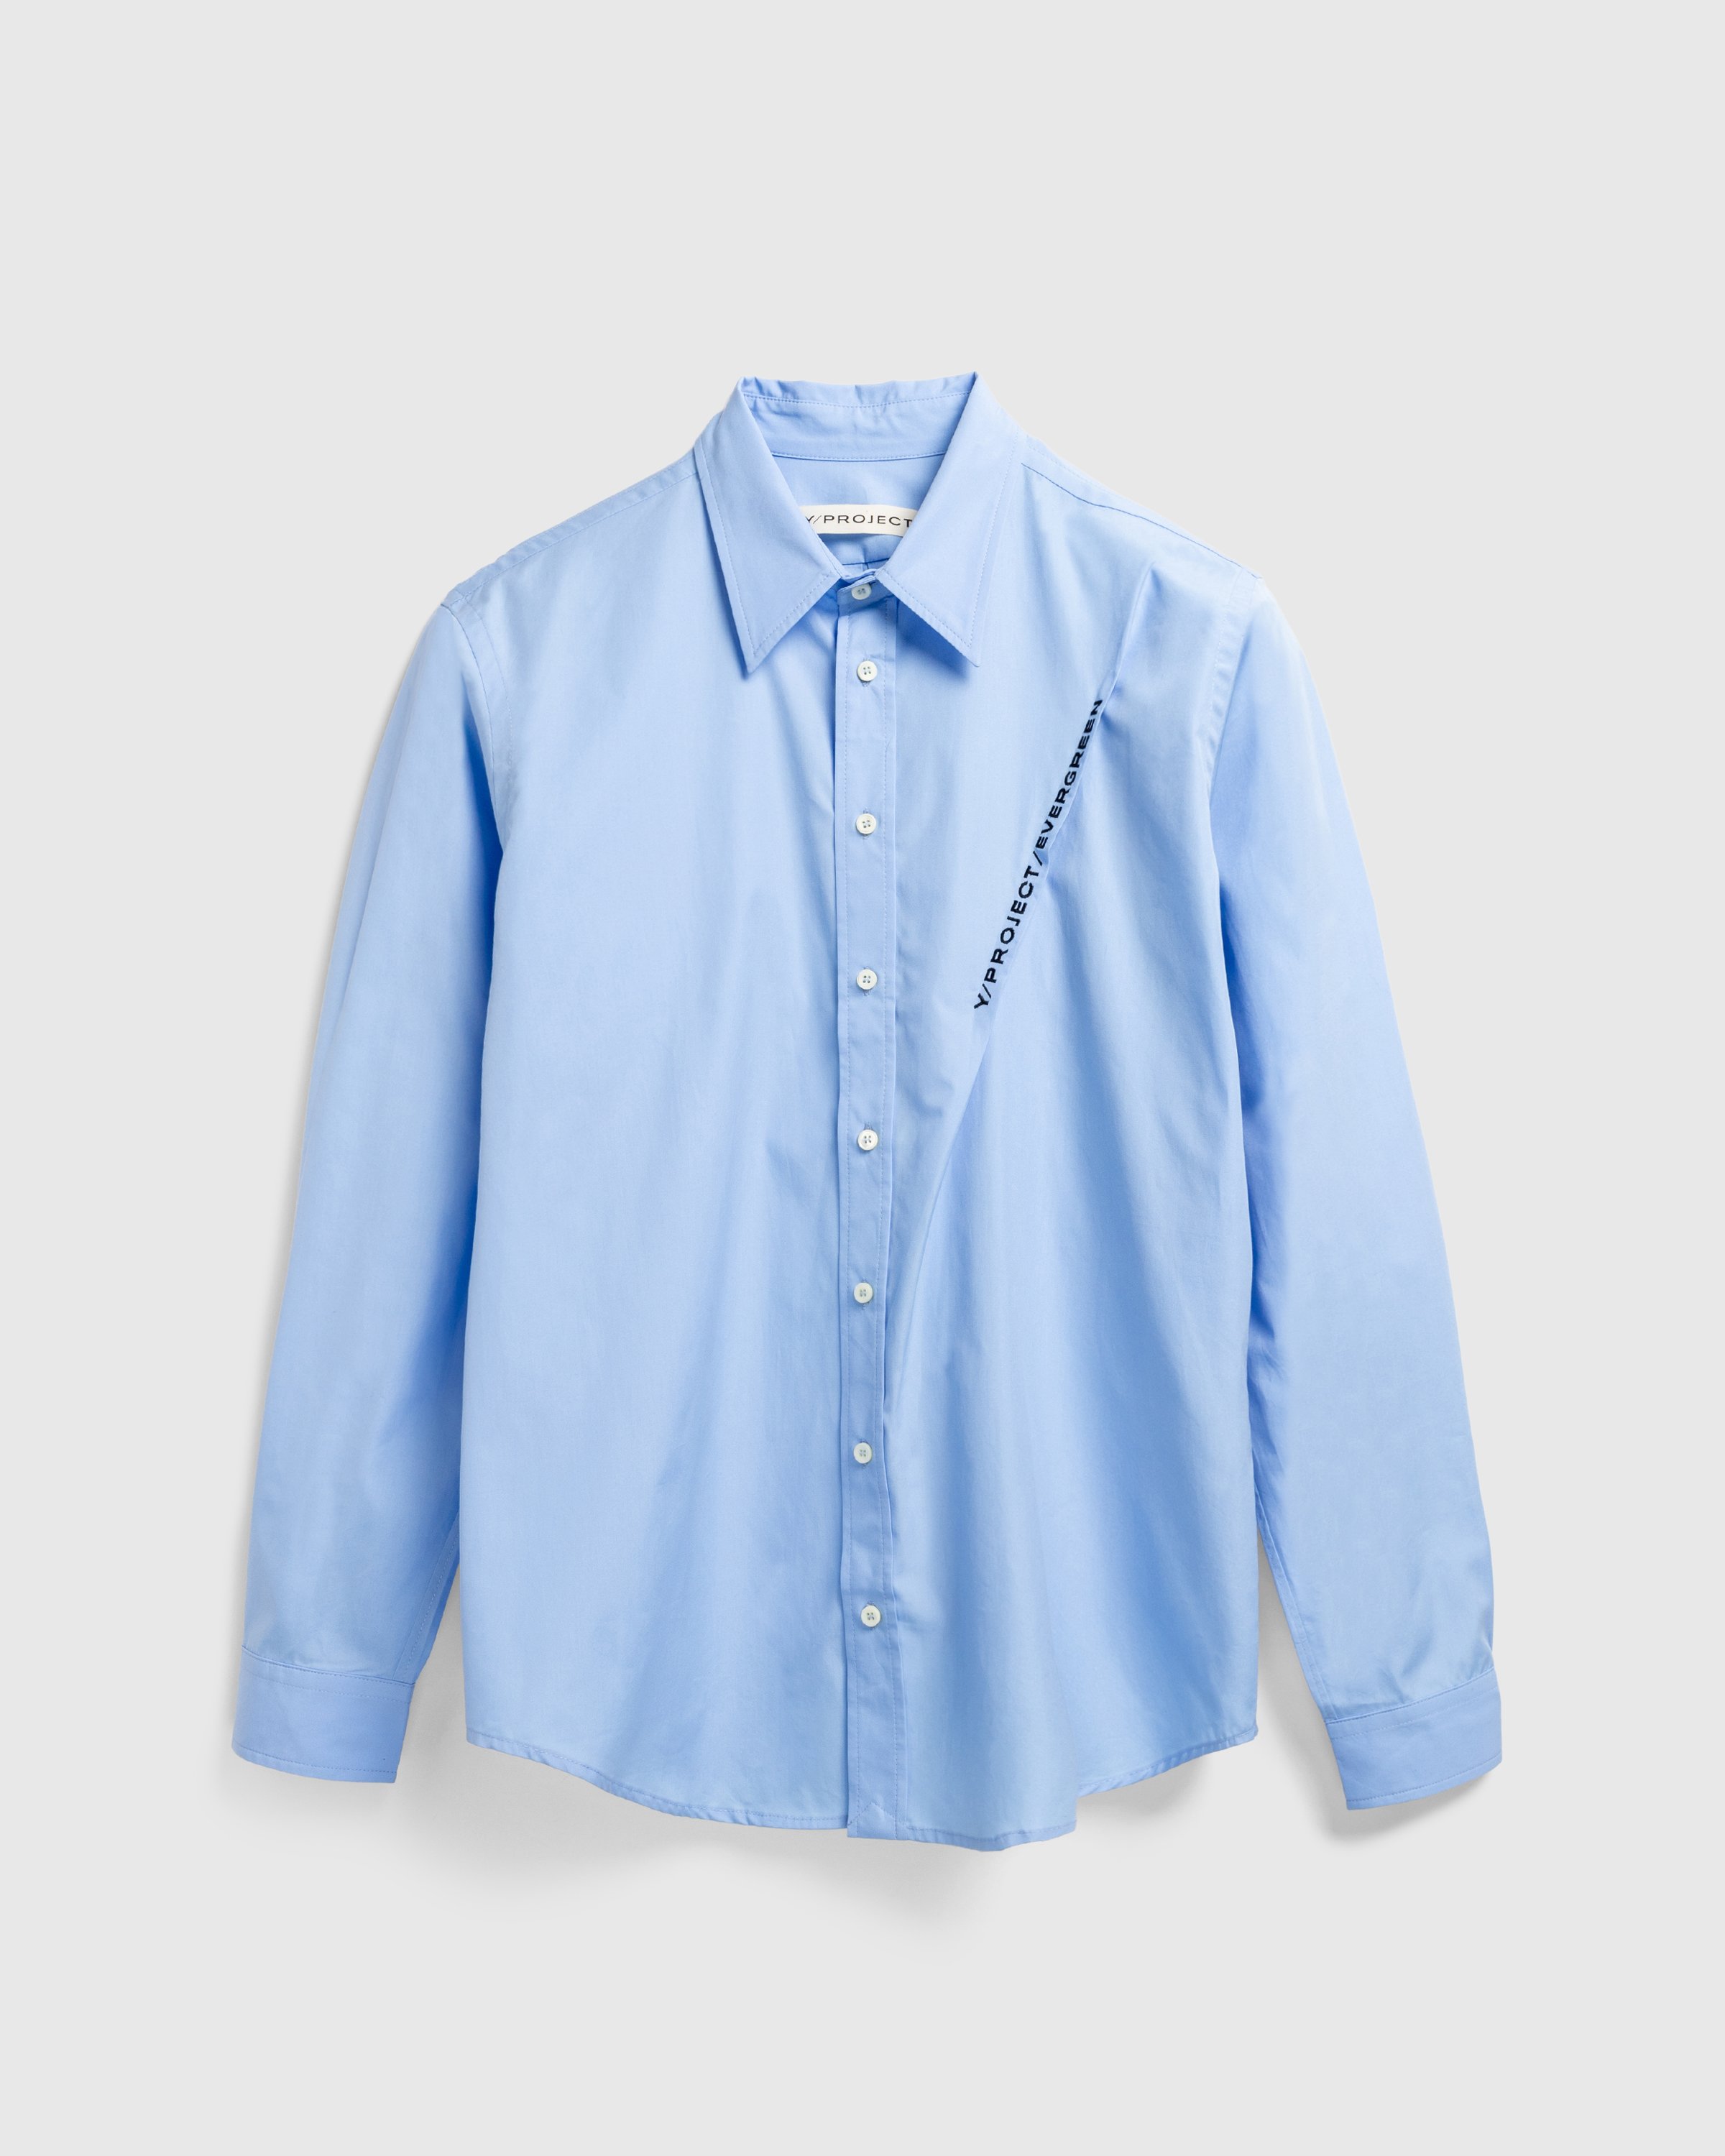 Y/Project - Evergreen Pinched Logo Shirt Light Blue - Clothing - Blue - Image 1